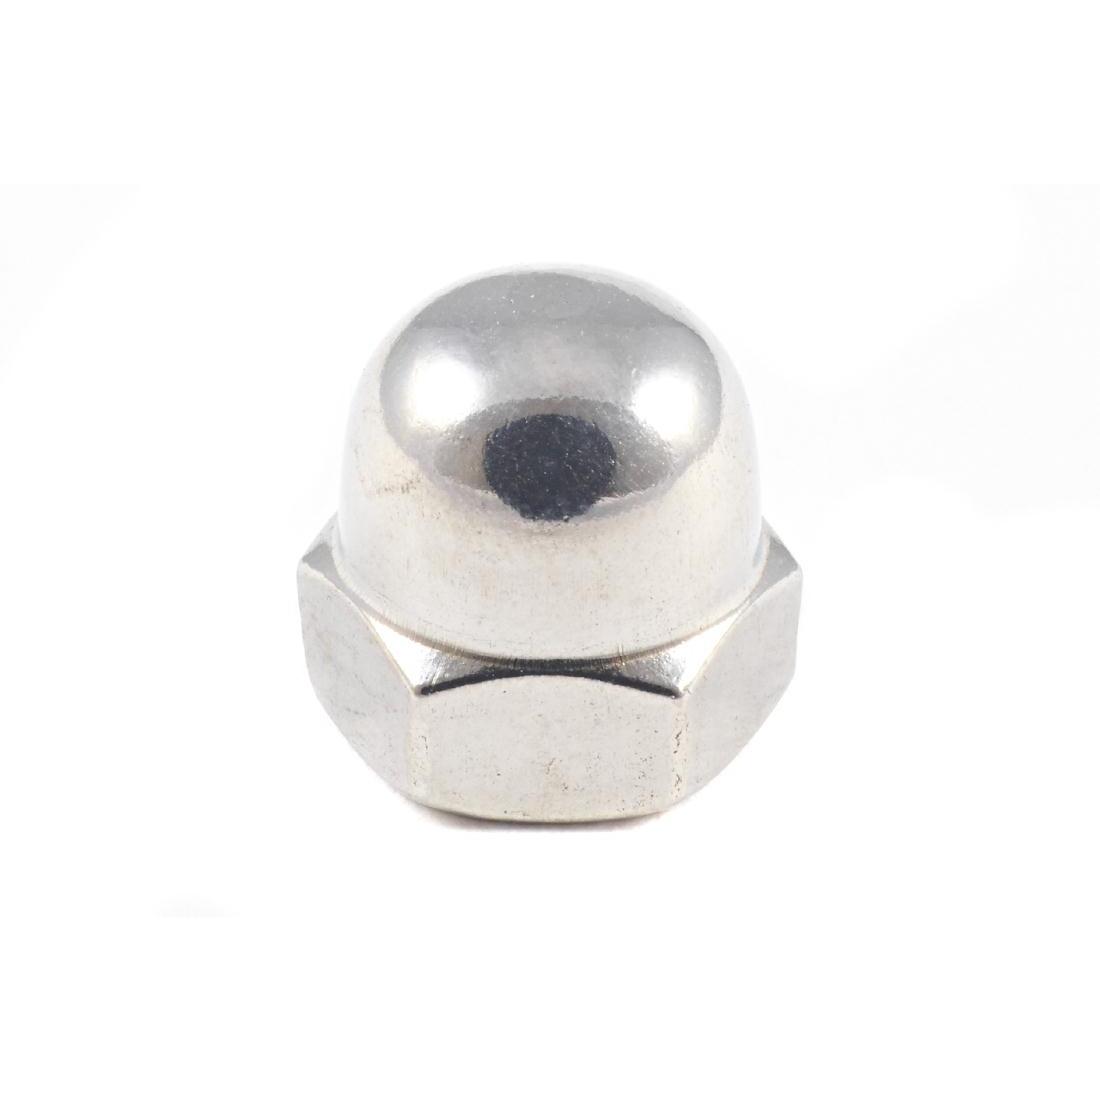 A2 Stainless Steel Dome Nut (M8) - AD779 - 1